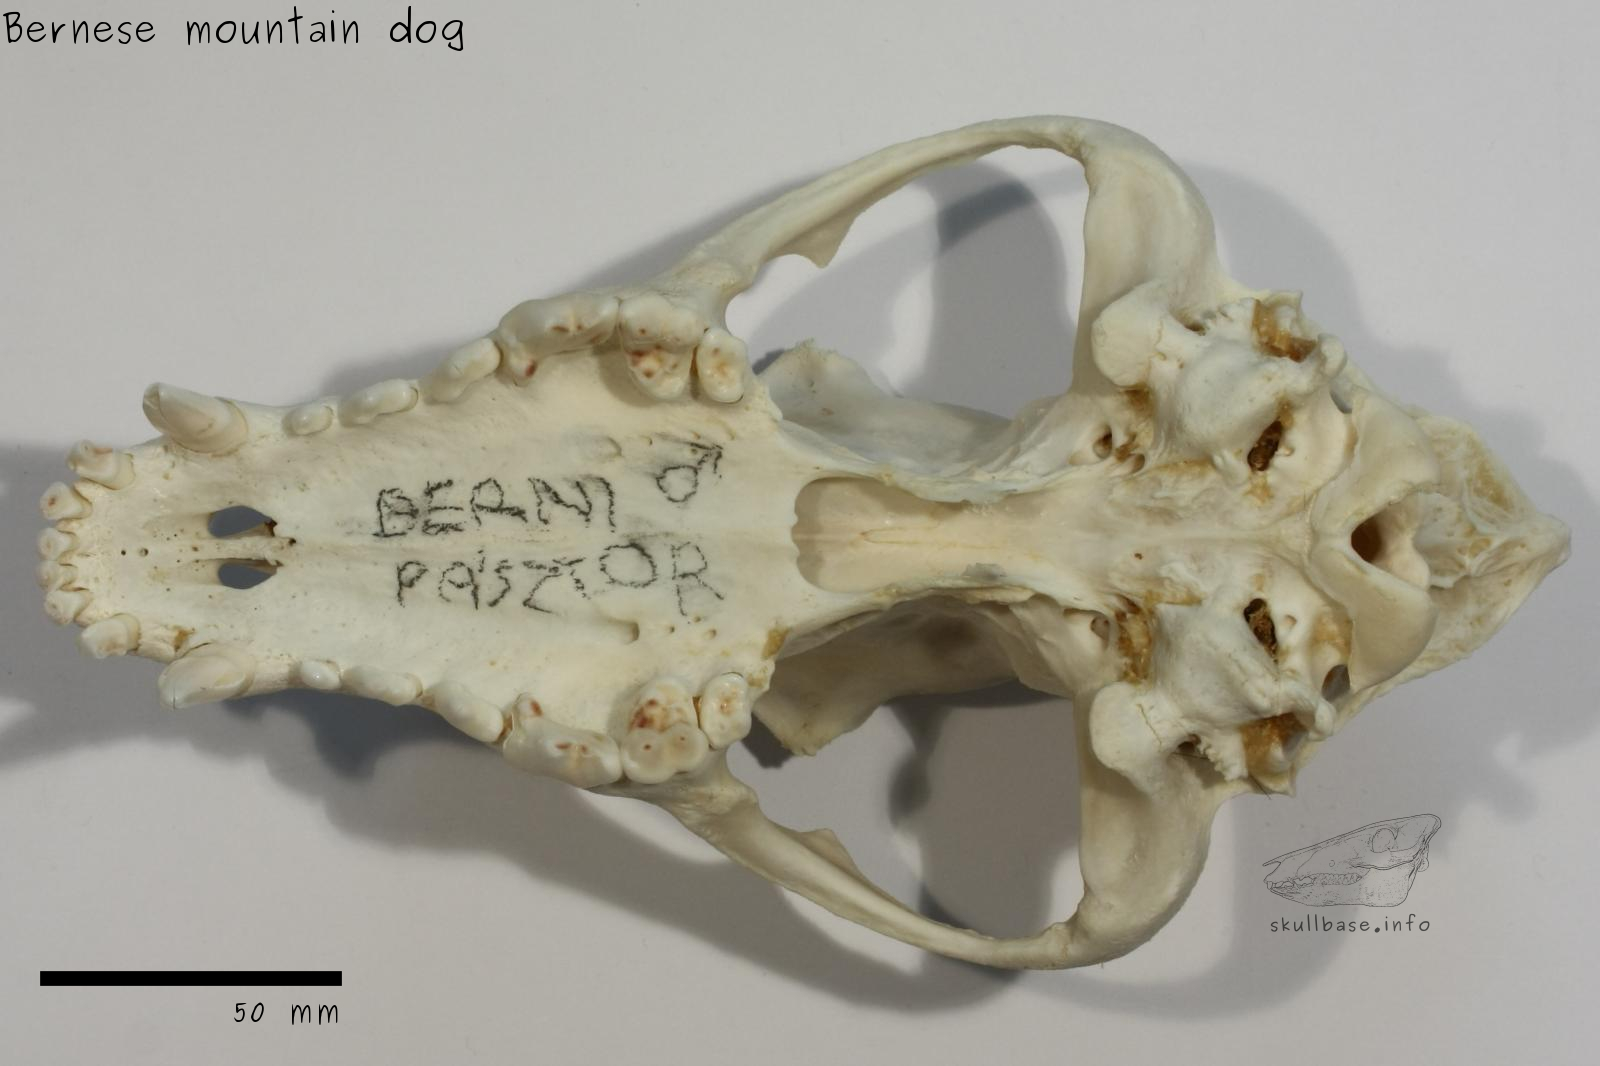 Bernese mountain dog (Canis lupus familiaris) skull ventral view